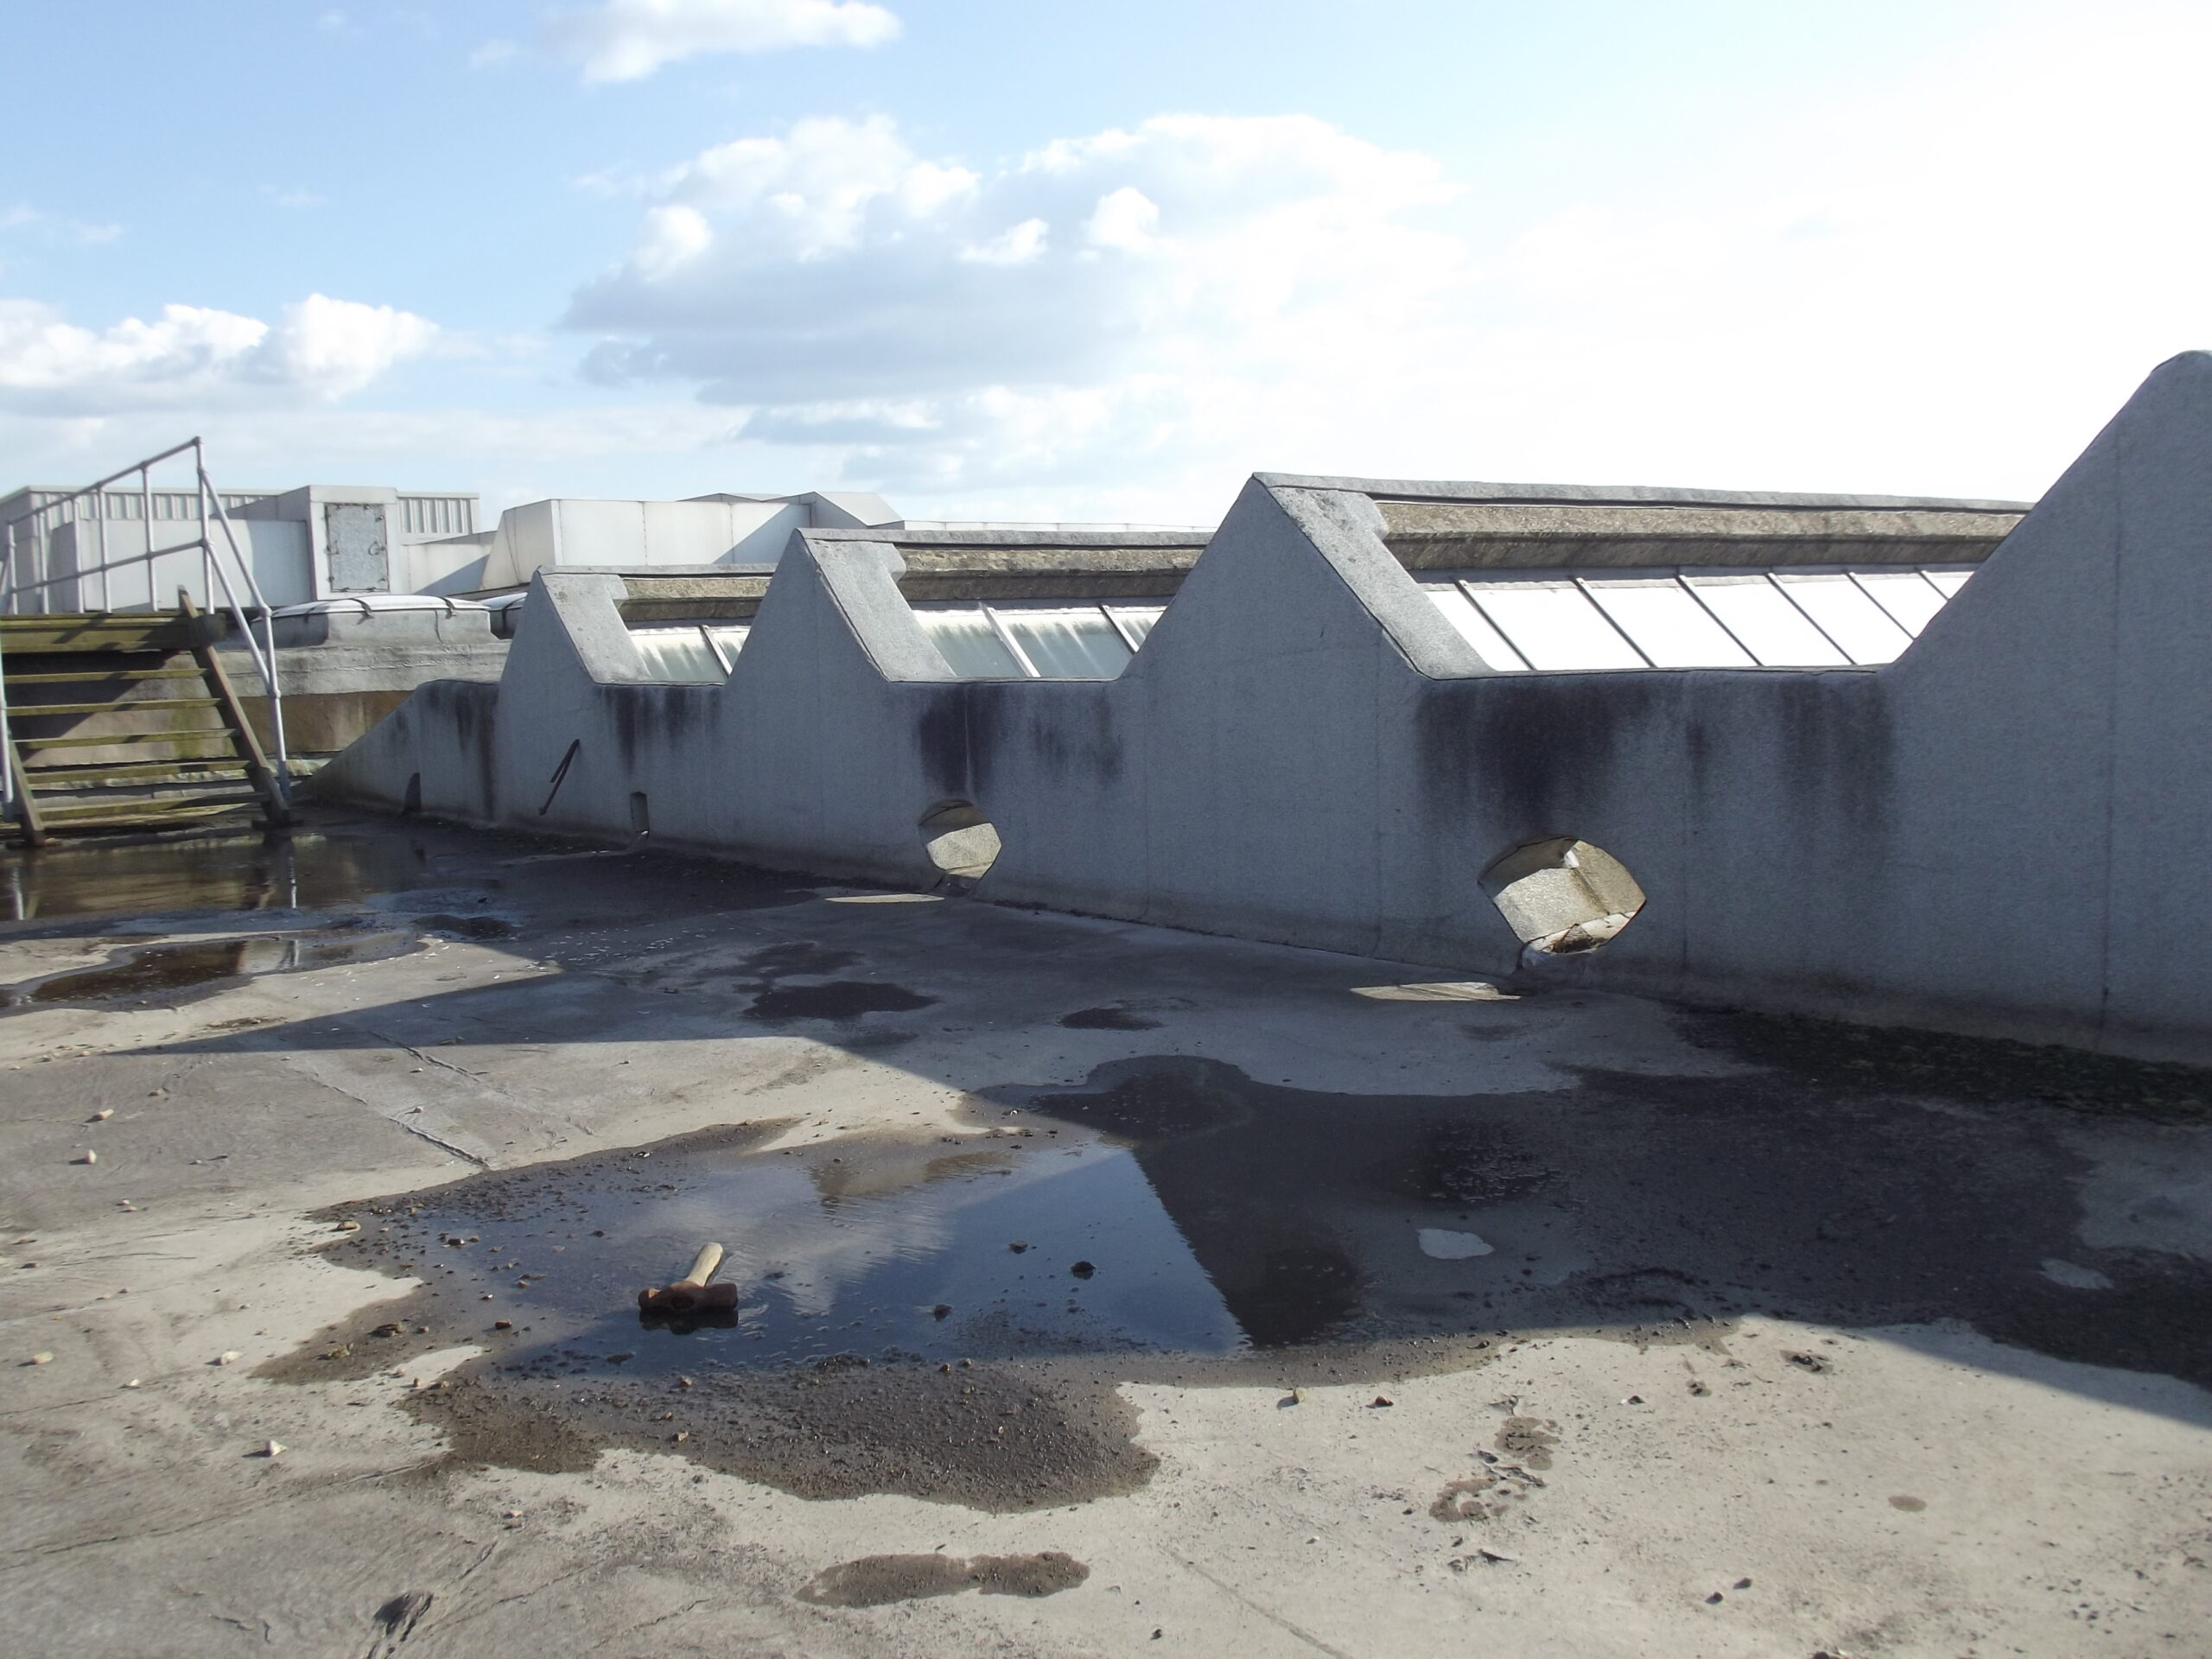 West Block roof - glazed roof over former HMA (W415)